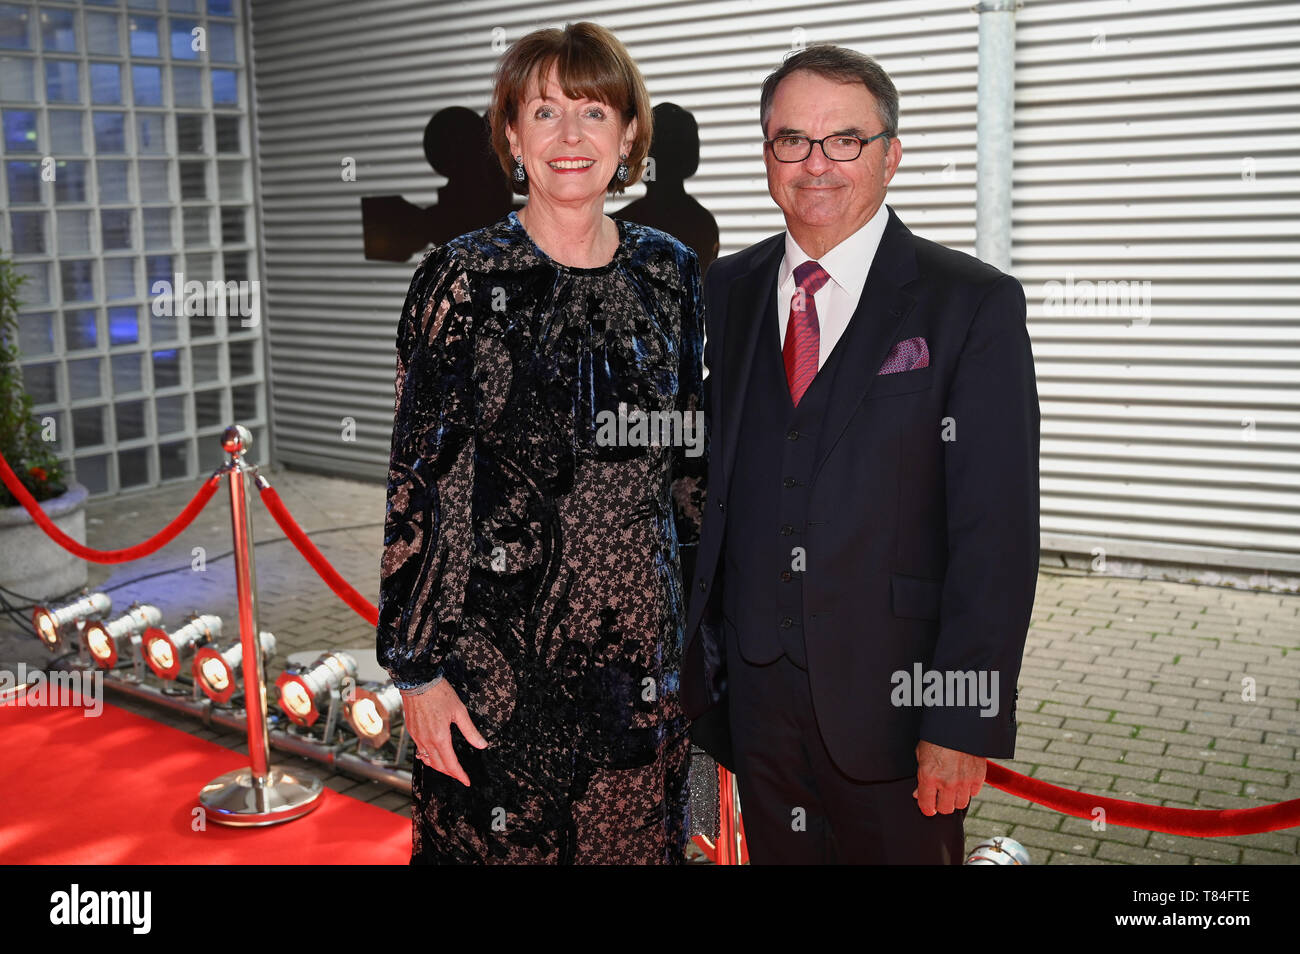 Cologne, Germany. 10th May, 2019. Henriette Reker, Lord Mayor of the City  of Cologne, and her